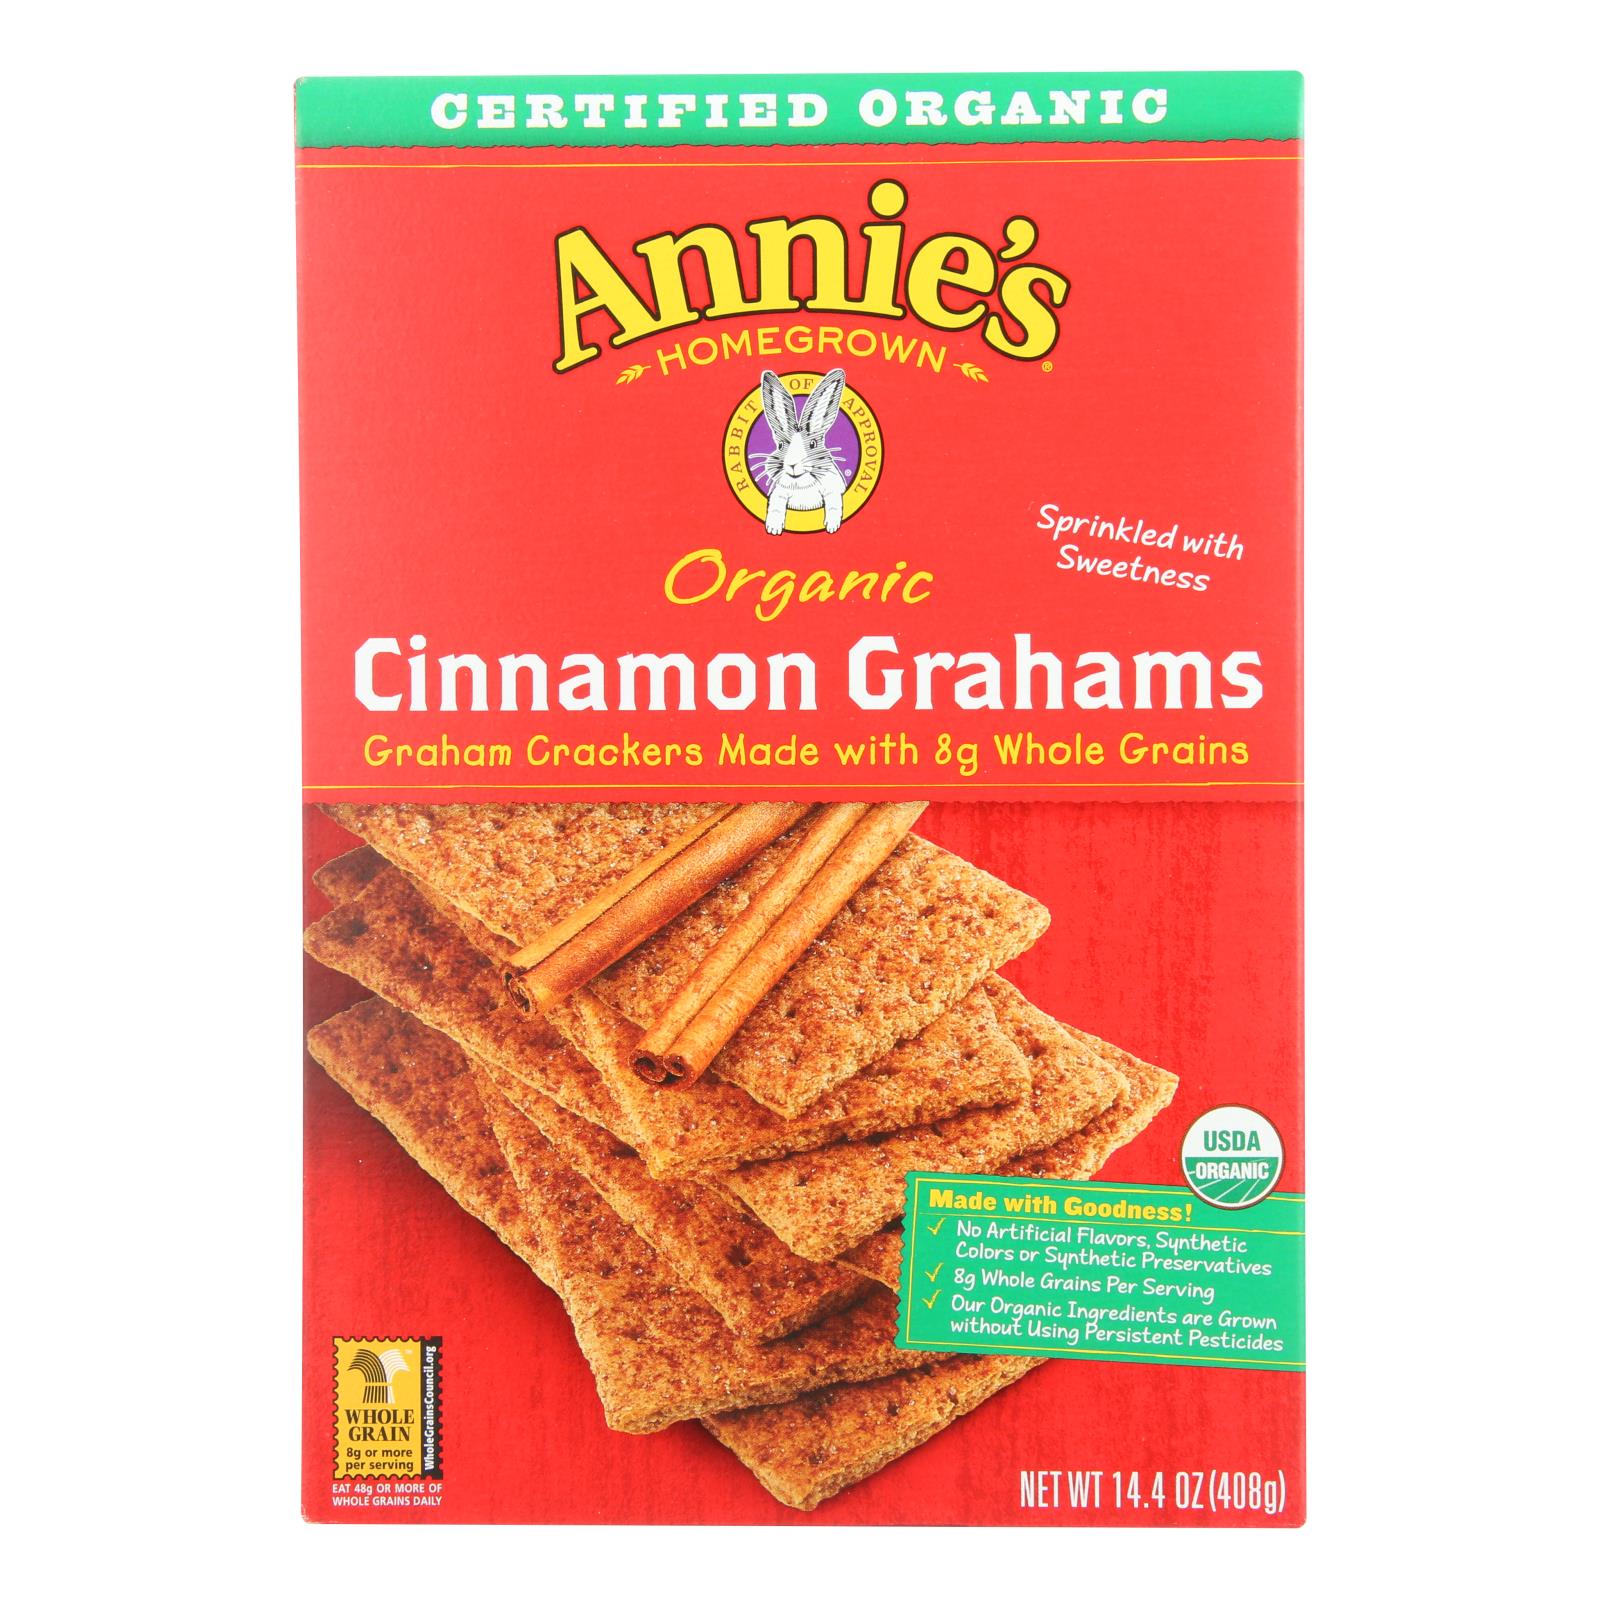 Annie'S Homegrown, Annie's Homegrown Organic Cinnamon Graham Crackers - Case of 12 - 14.4 oz. (Pack of 12)